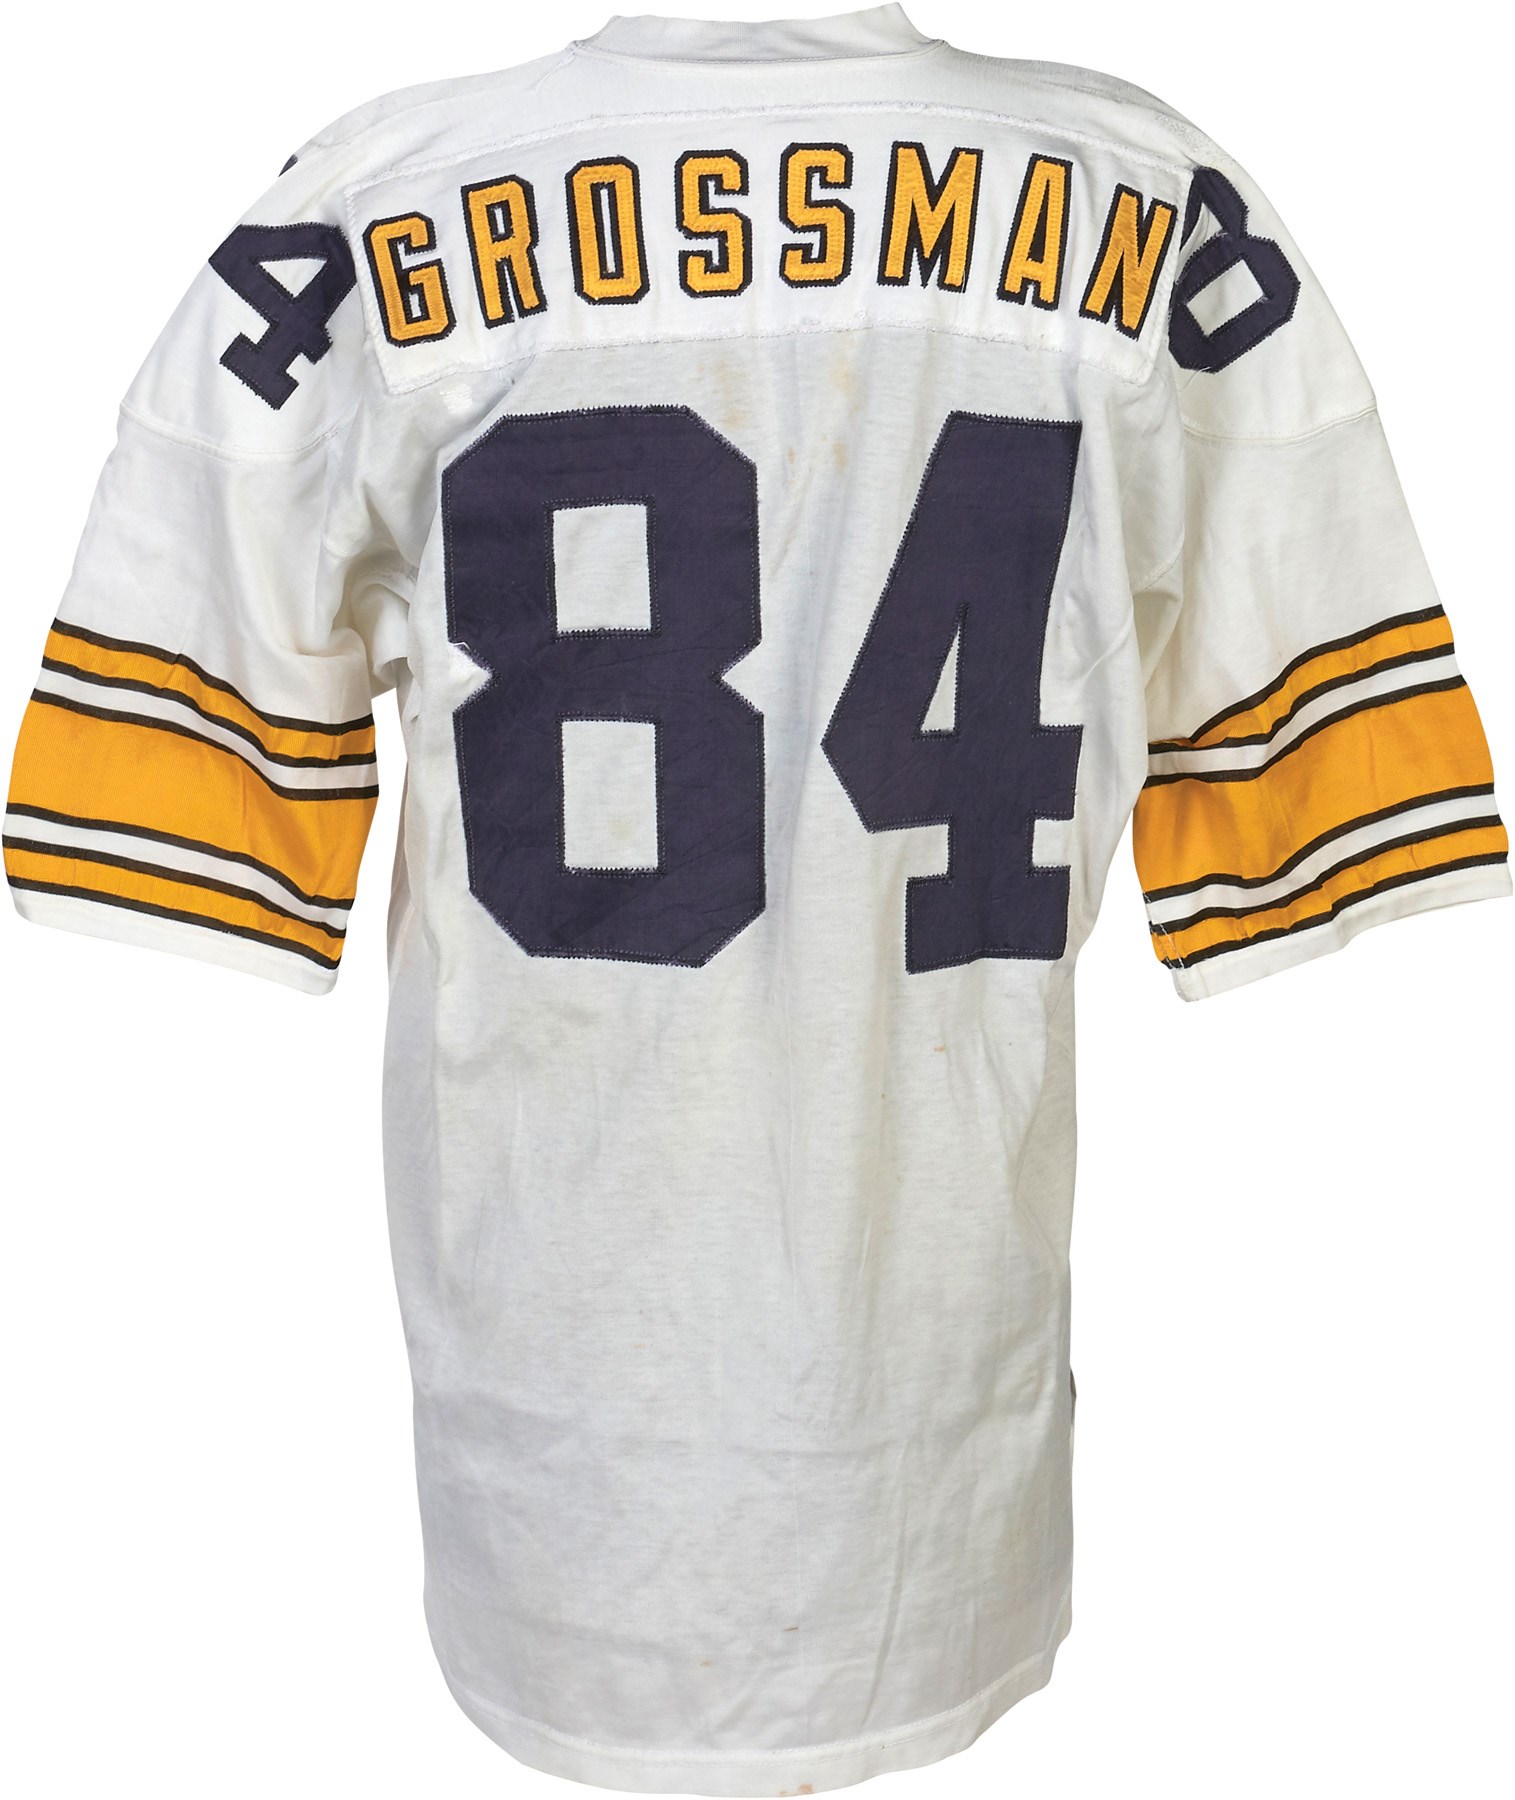 The Pittsburgh Steelers Game Worn Jersey Archive - 1973 Randy Grossman Pittsburgh Steelers Game Worn Jersey